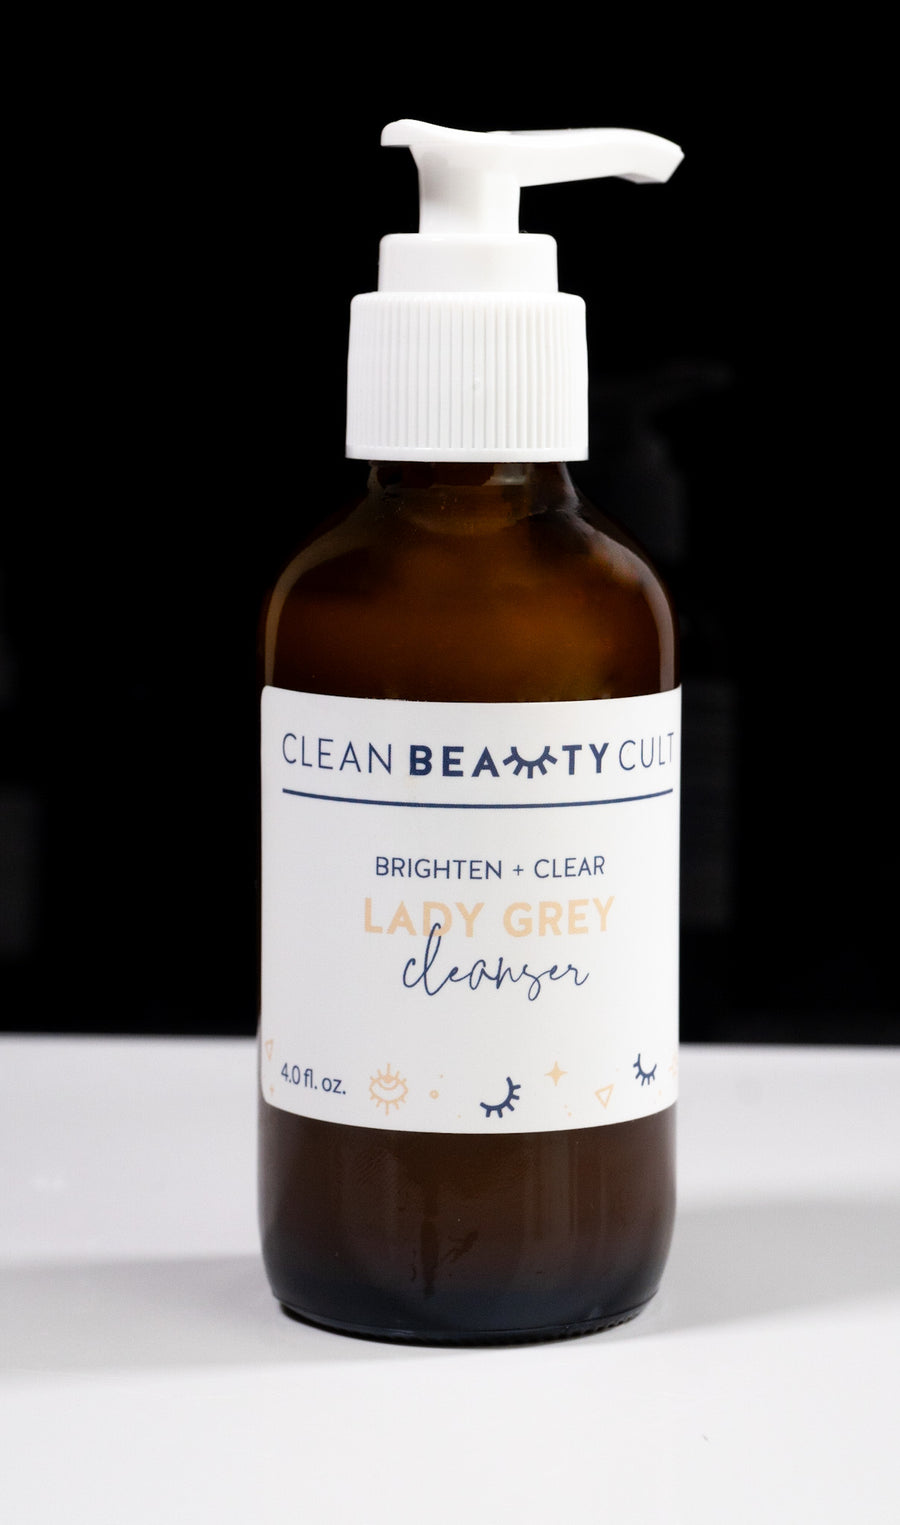 Lady Grey Cleanser by Clean Beauty Cult